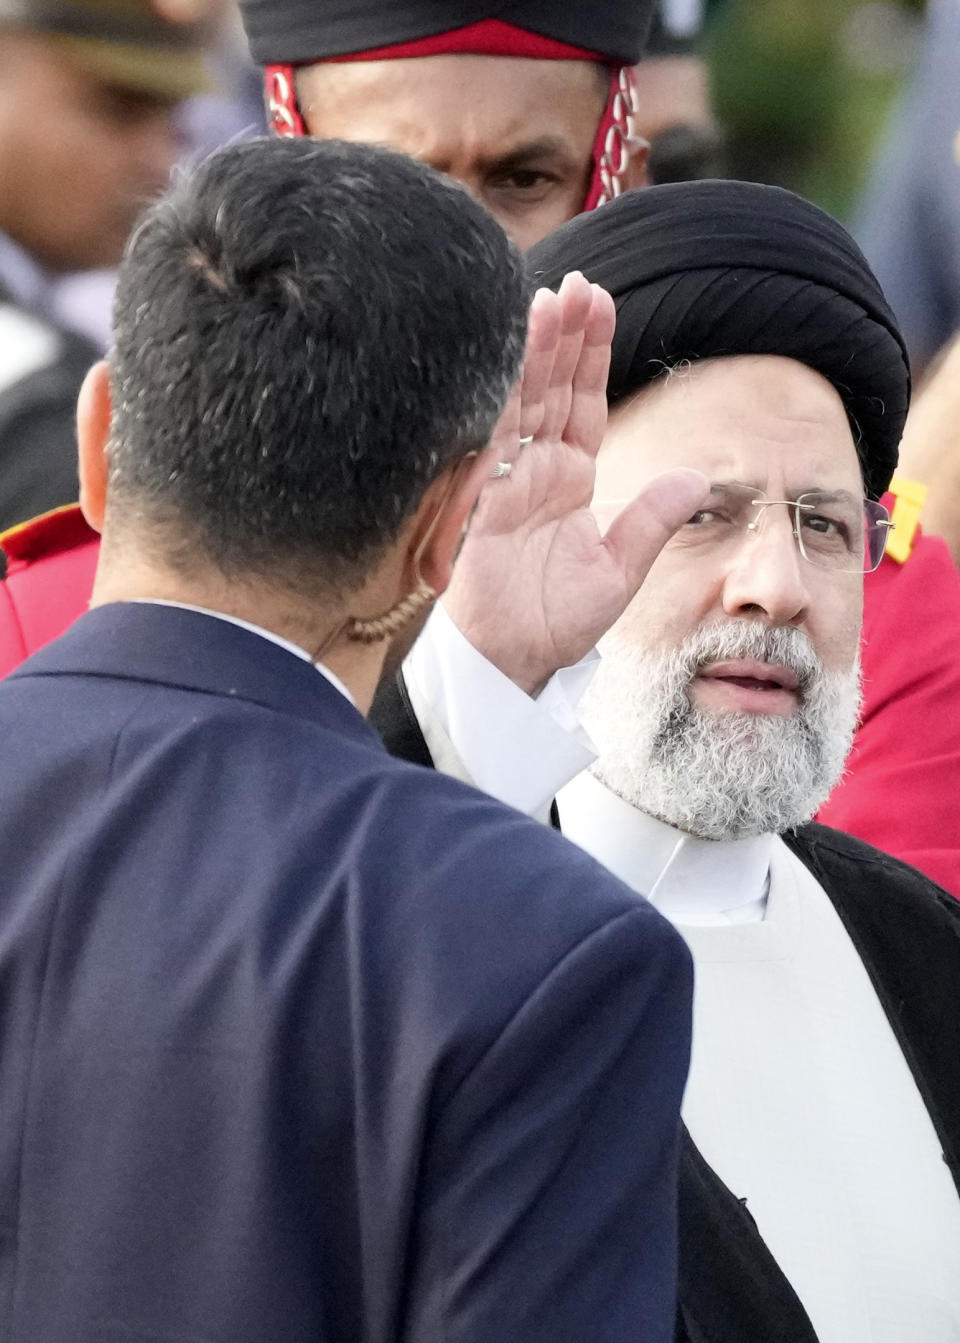 Iranian President Ebrahim Raisi, waves to the media after disembarking from a plane in Colombo, Sri Lanka, Wednesday, April 24, 2024. Raisi is the first Iranian leader to visit Sri Lanka since former President Mahmoud Ahmedinejad visited the country in 2008. (AP Photo/Eranga Jayawardena)